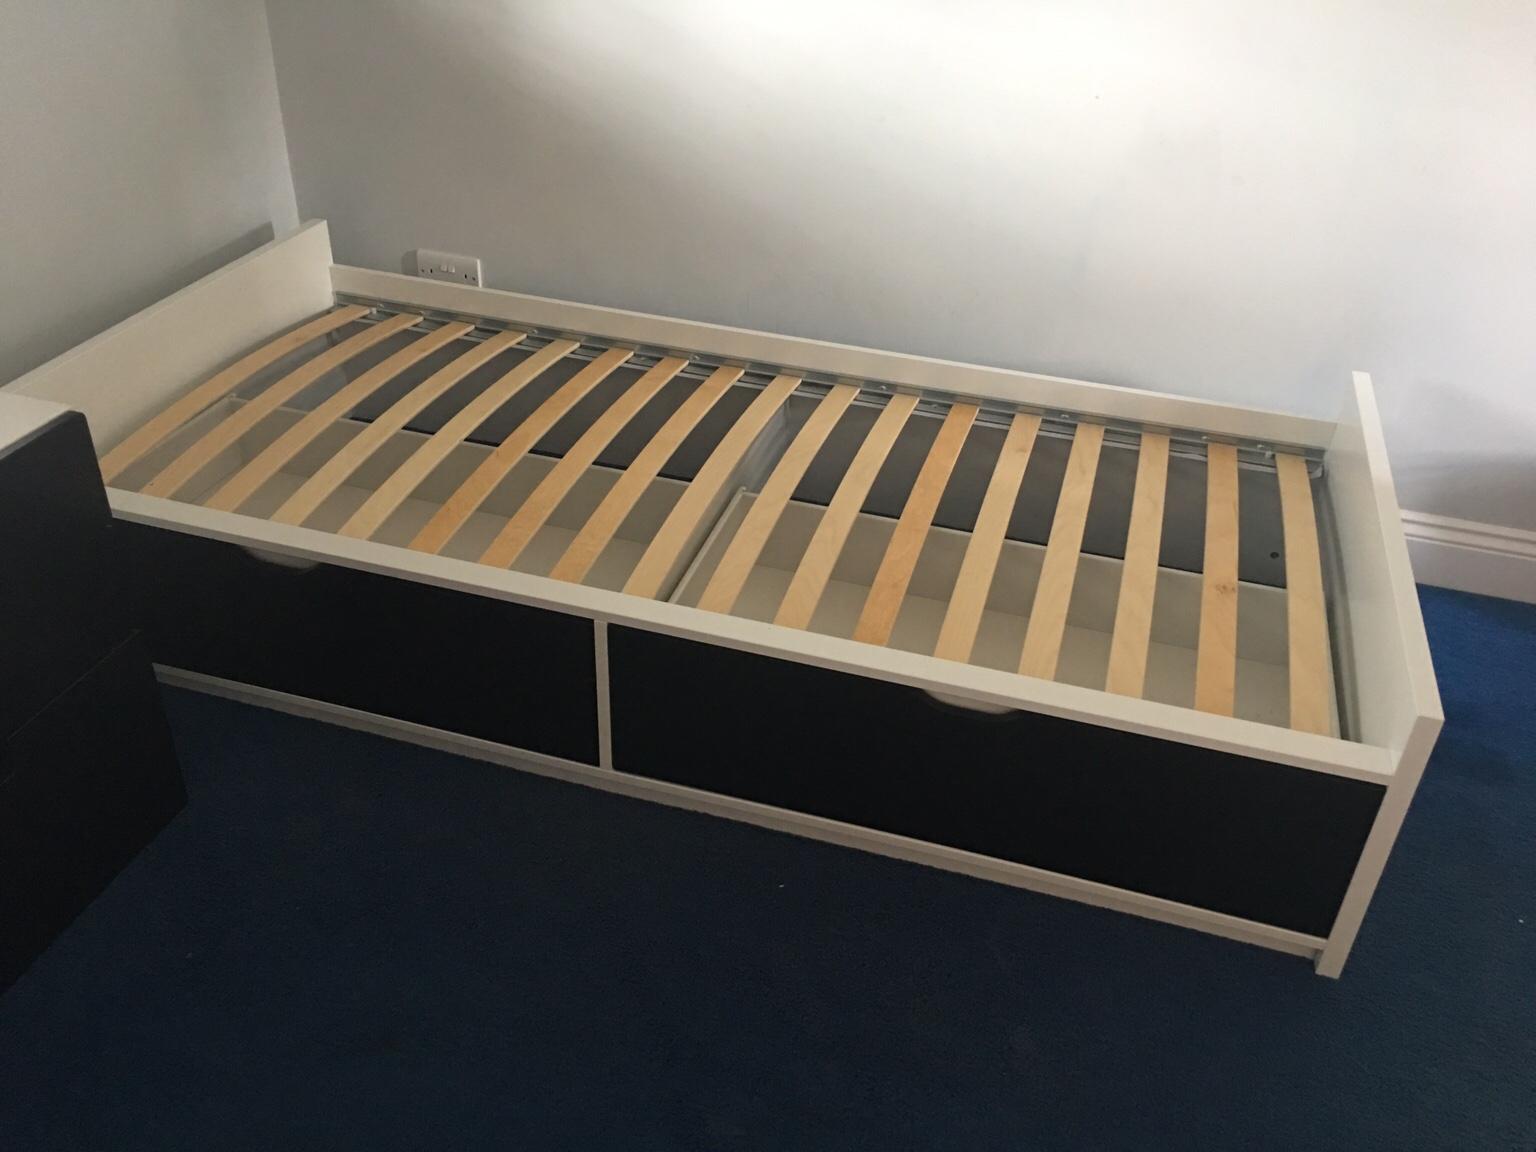 Ikea Single Bed Drawers In London Borough Of Havering For